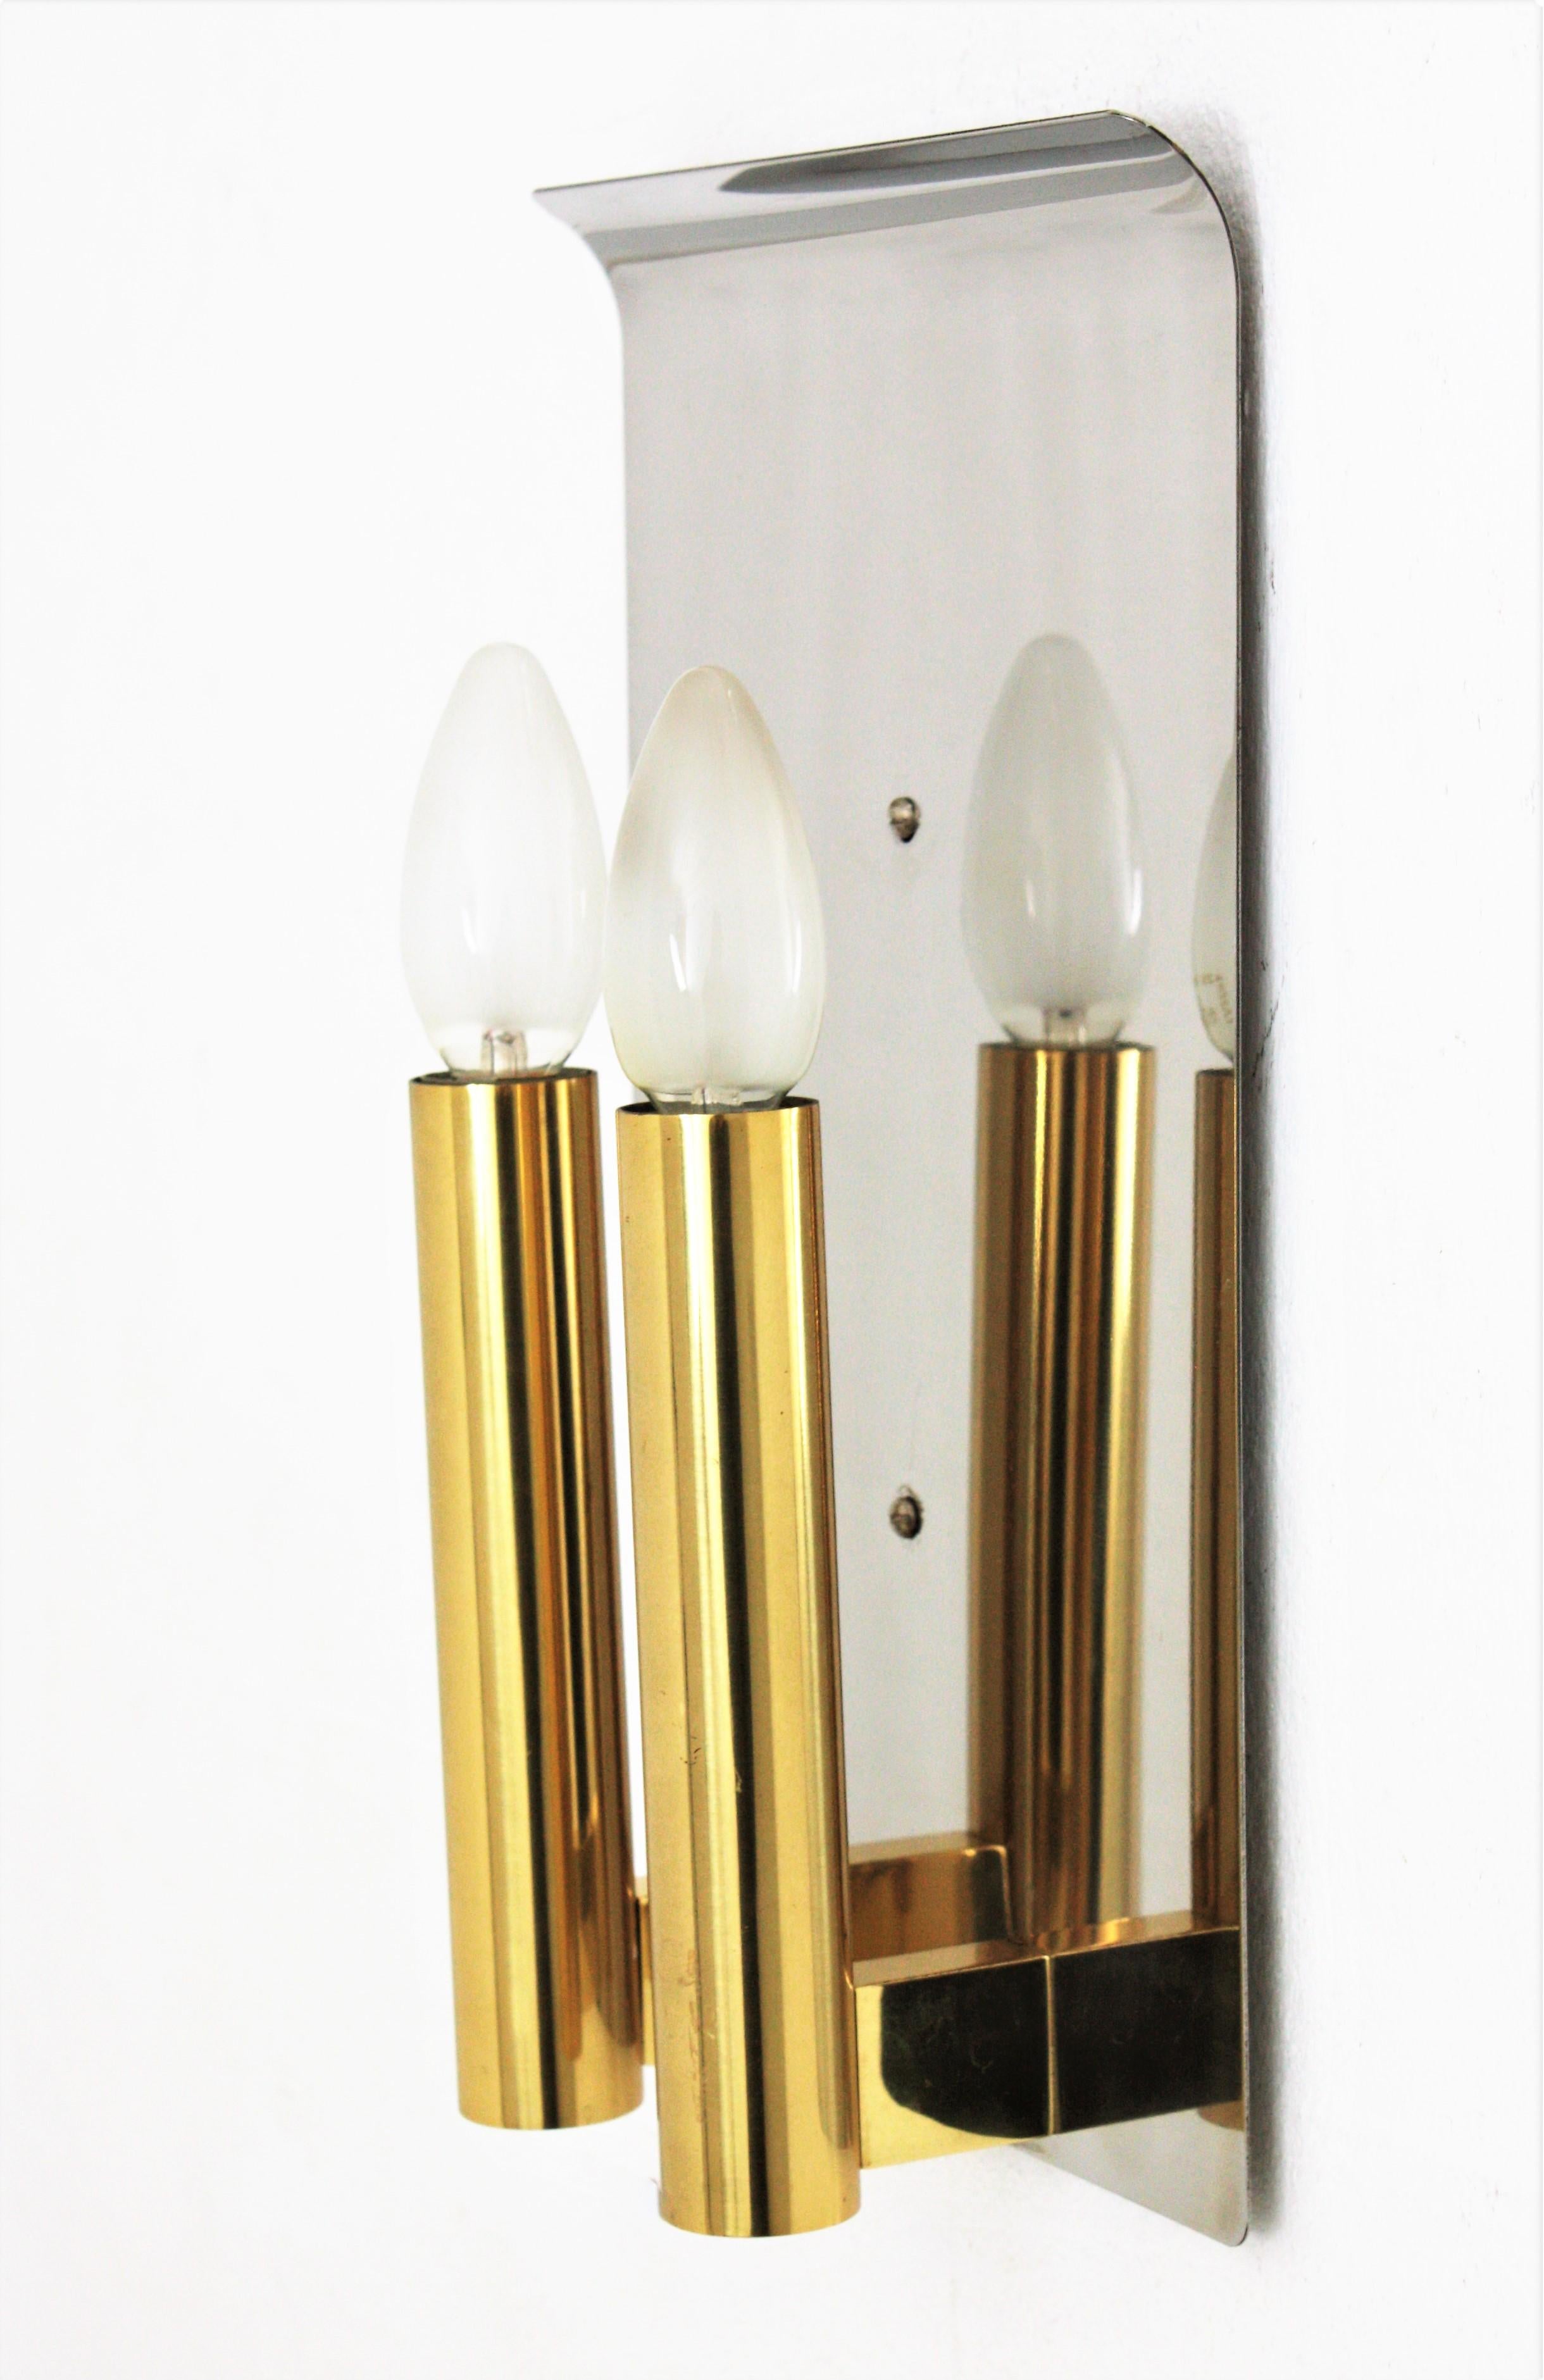 Sciolari Wall Sconce in Brass and Steel, Italy, 1960s For Sale 1